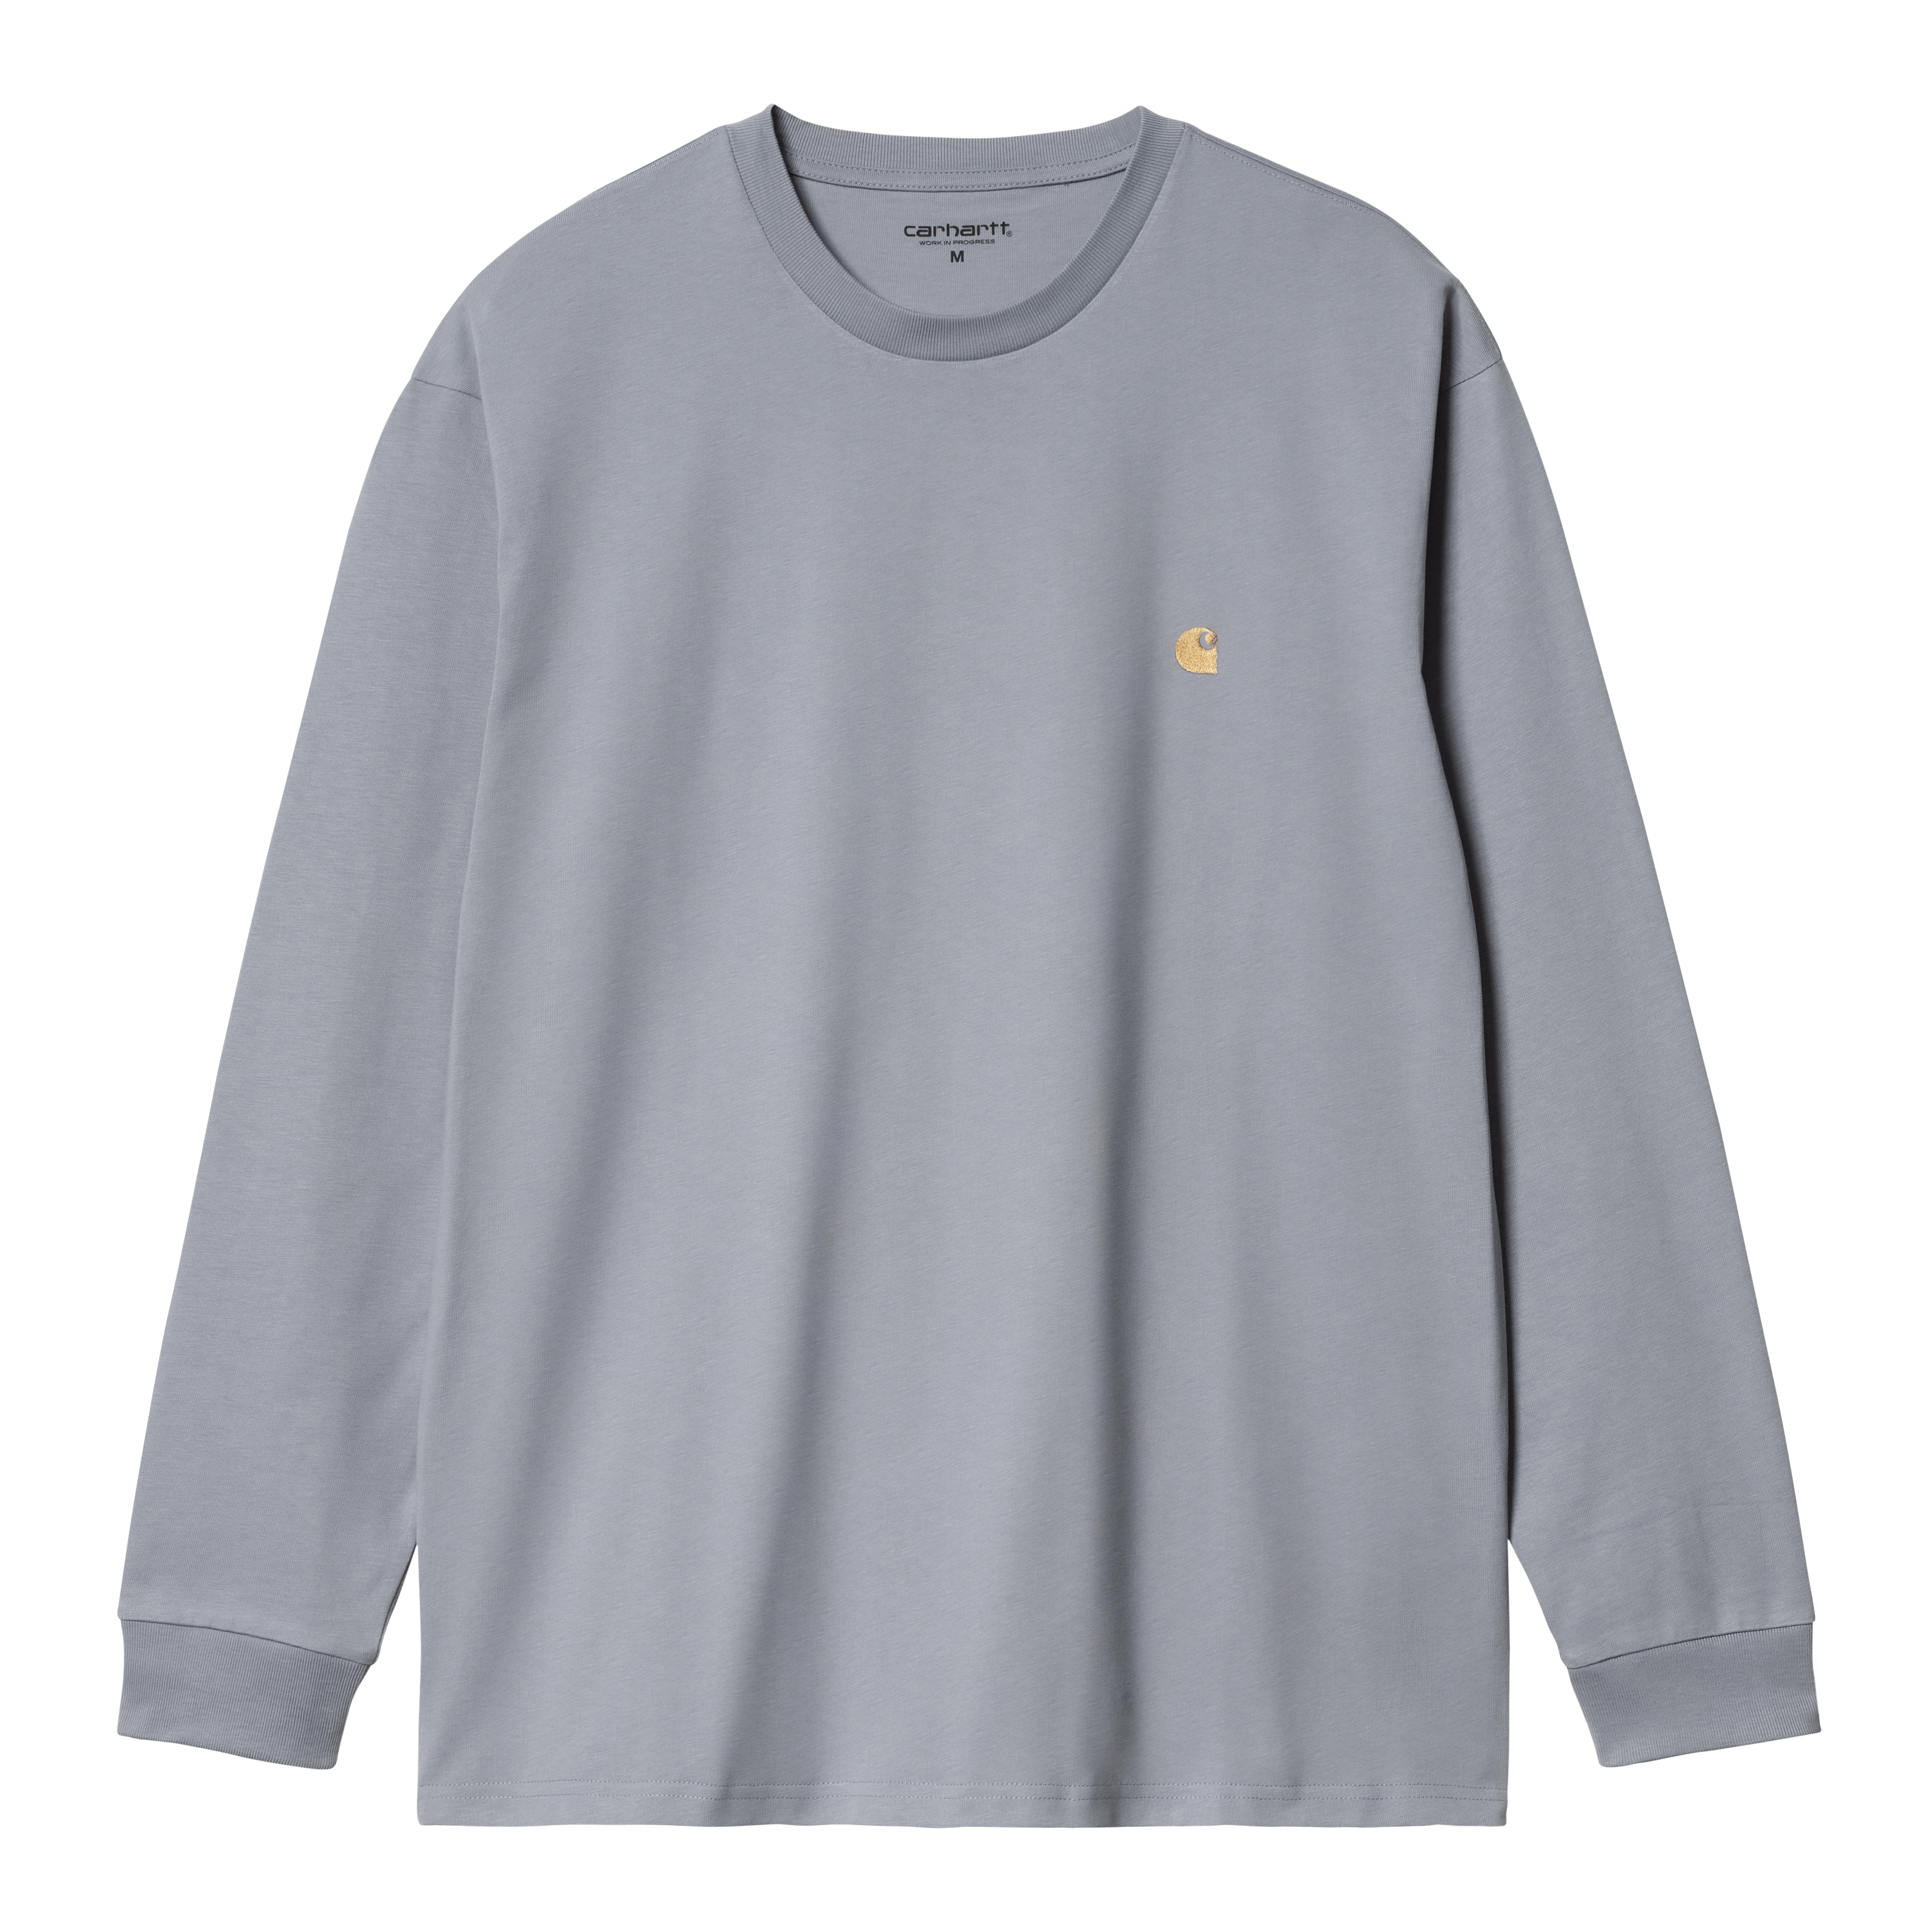 Carhartt WIP - L/S CHASE T-SHIRT - Mirror/Gold